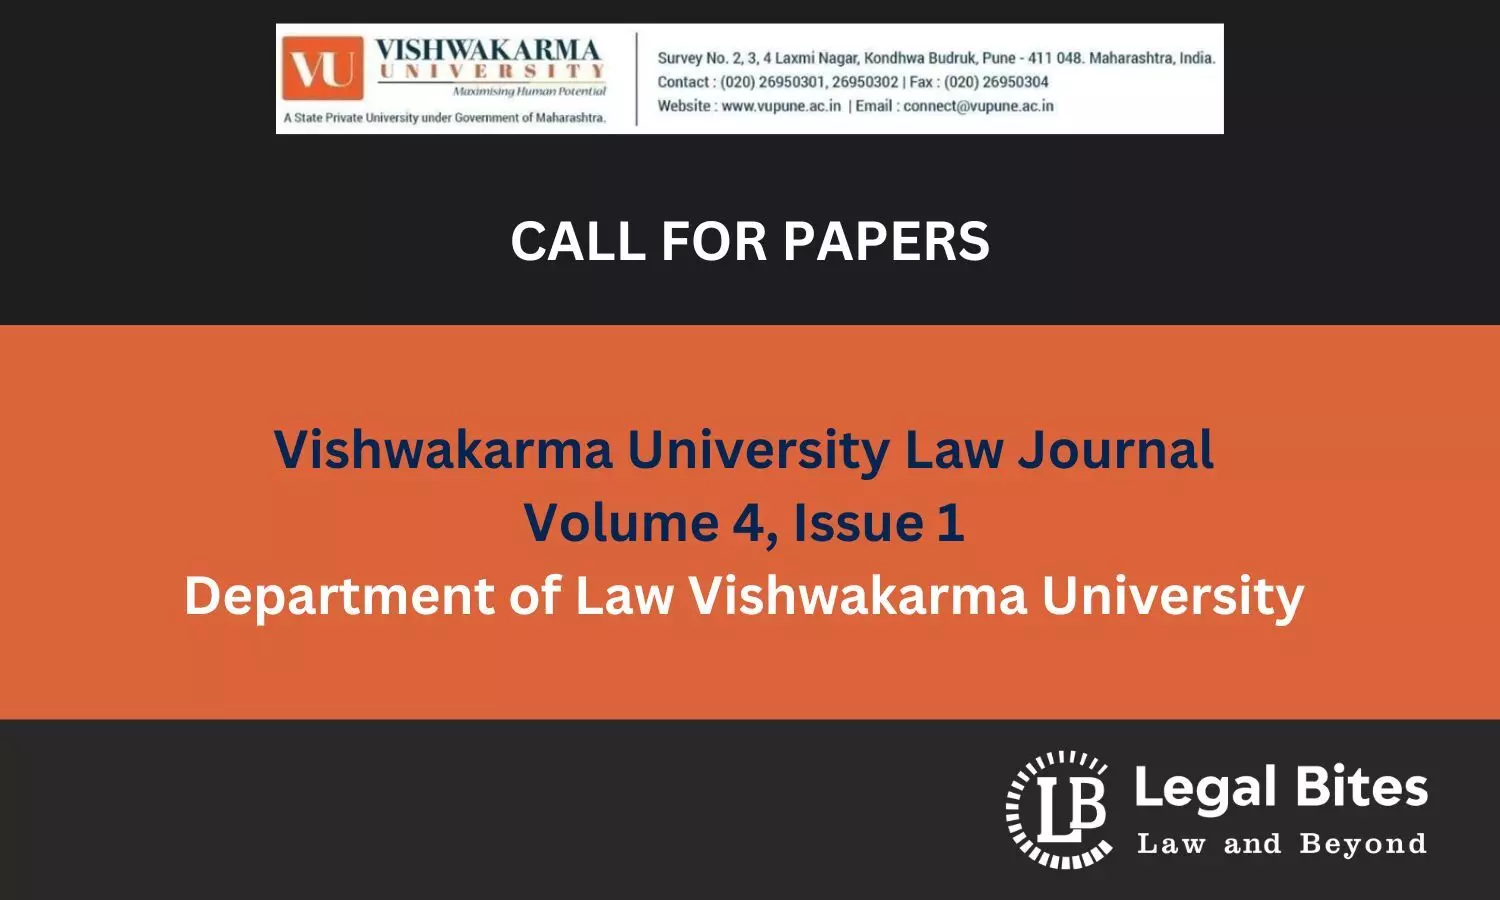 Call For Papers: Vishwakarma University Law Journal, Volume 4, Issue 1